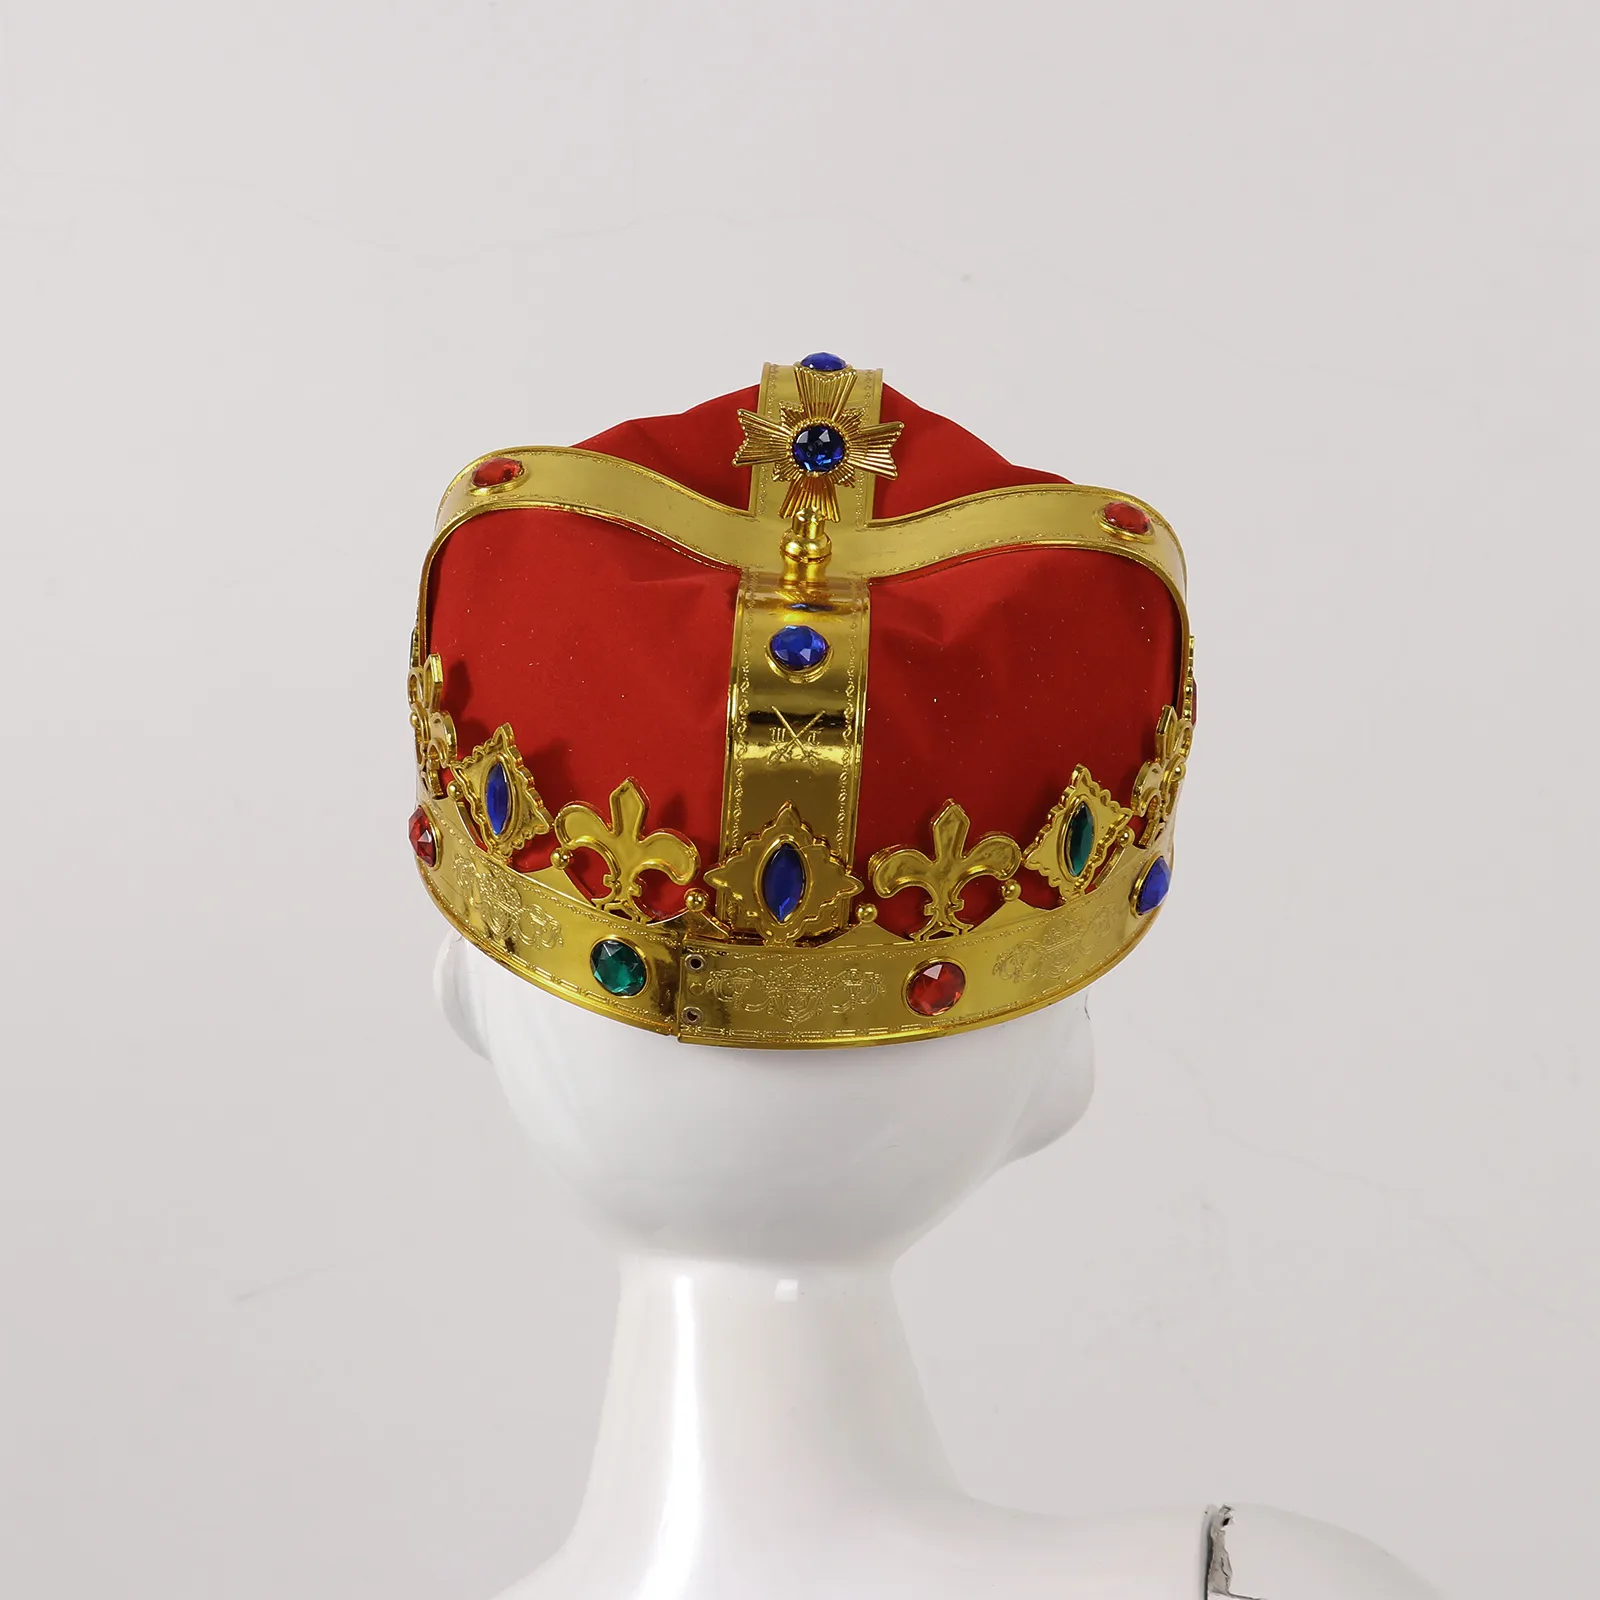 King Crown Hat Empereur Prince Caps décor Cosplay Props enfants Show Masquerade Birthday Dance Dance Party Performance Supplies